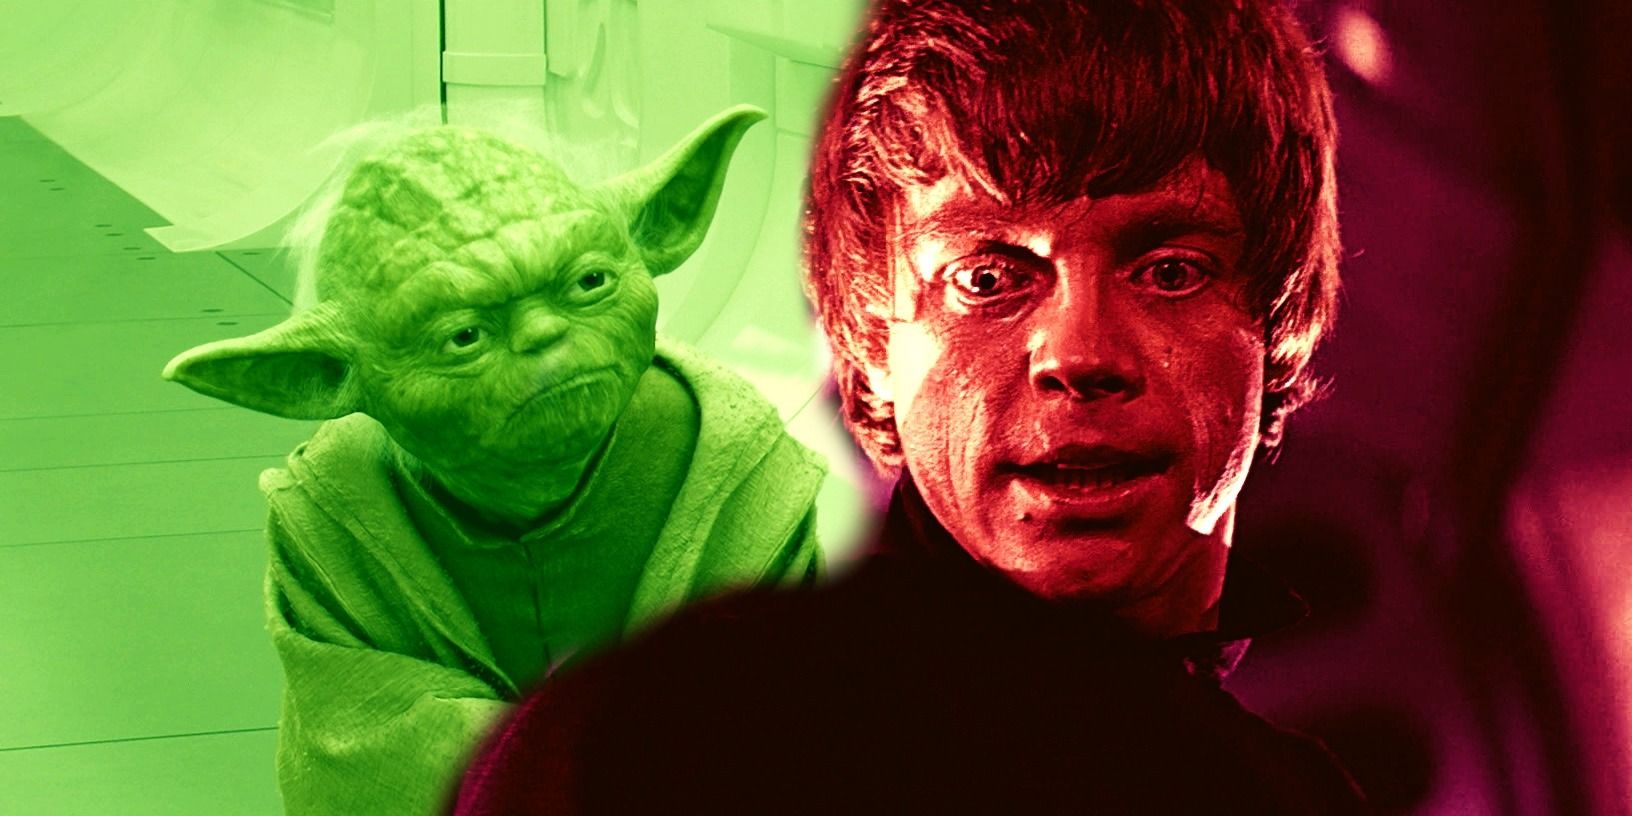 Yoda from Revenge of the Sith in a bright green hue to the left and Luke looking surprised in Return of the Jedi in a deep red hue to the right.